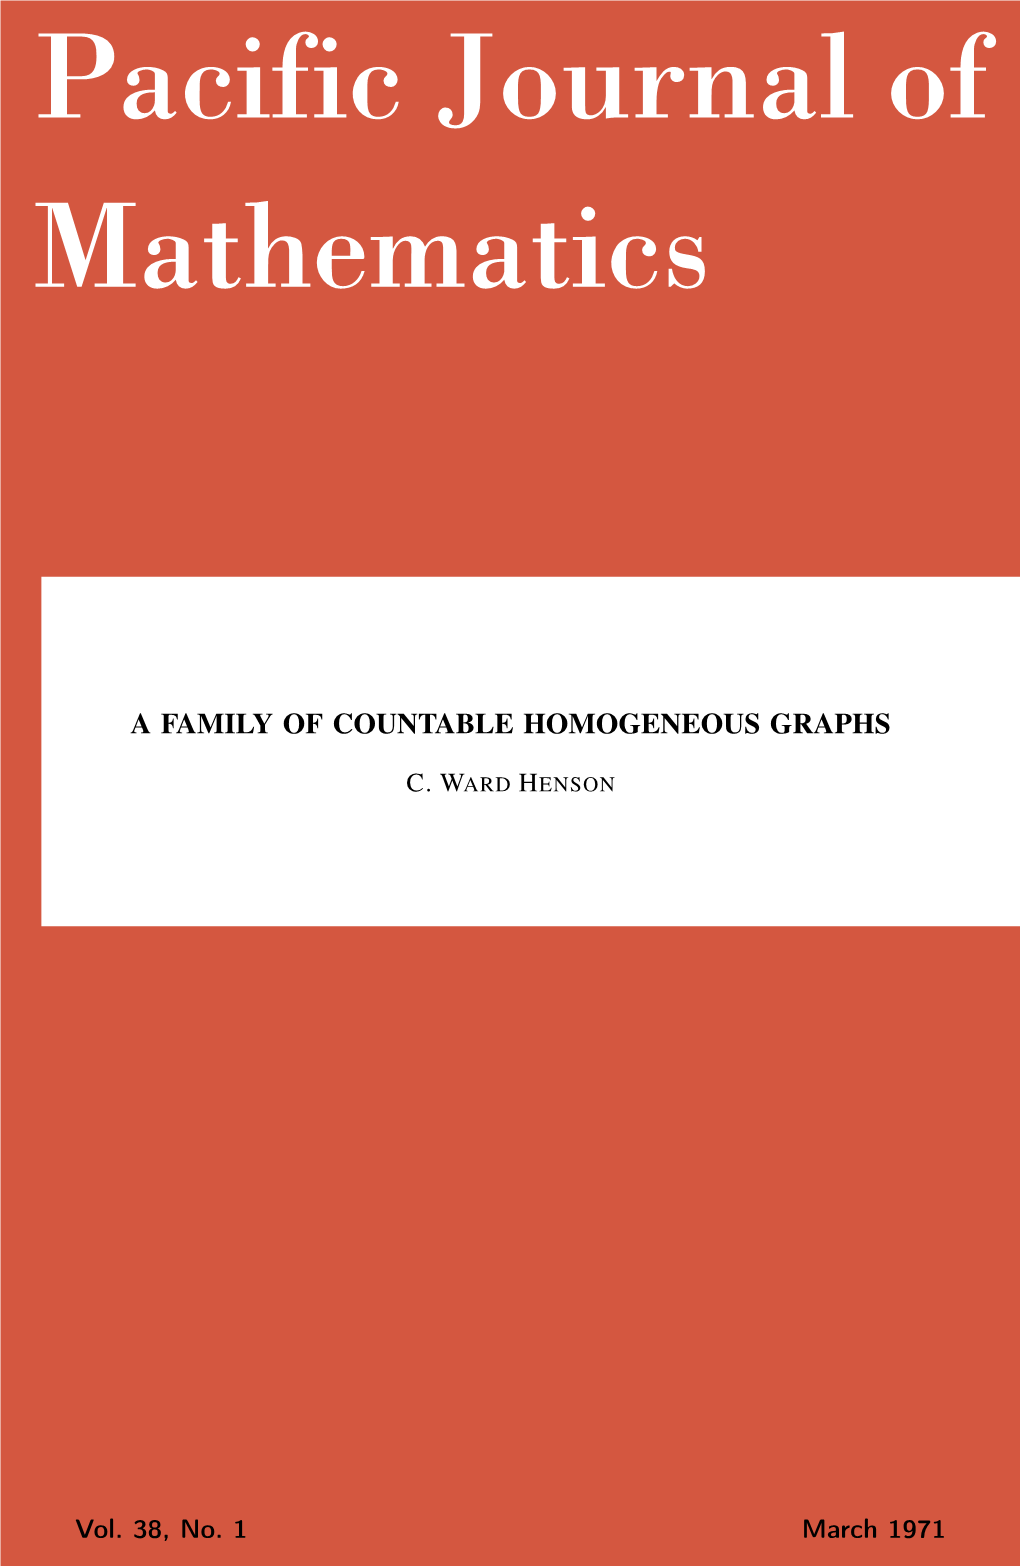 A Family of Countable Homogeneous Graphs